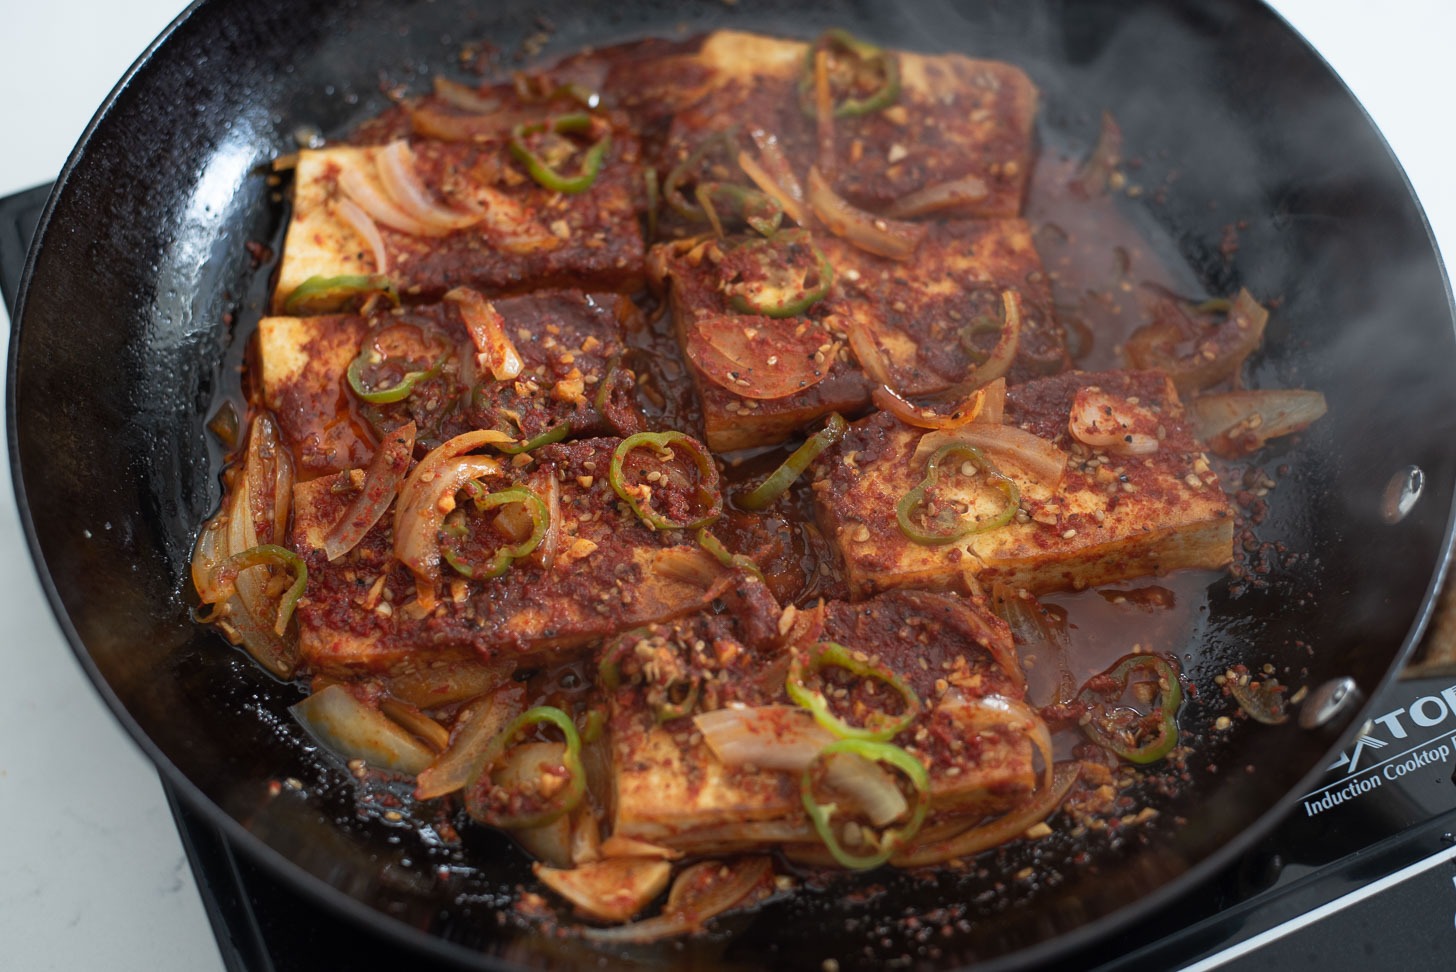 Tofu slices are are simmered in a skillet.